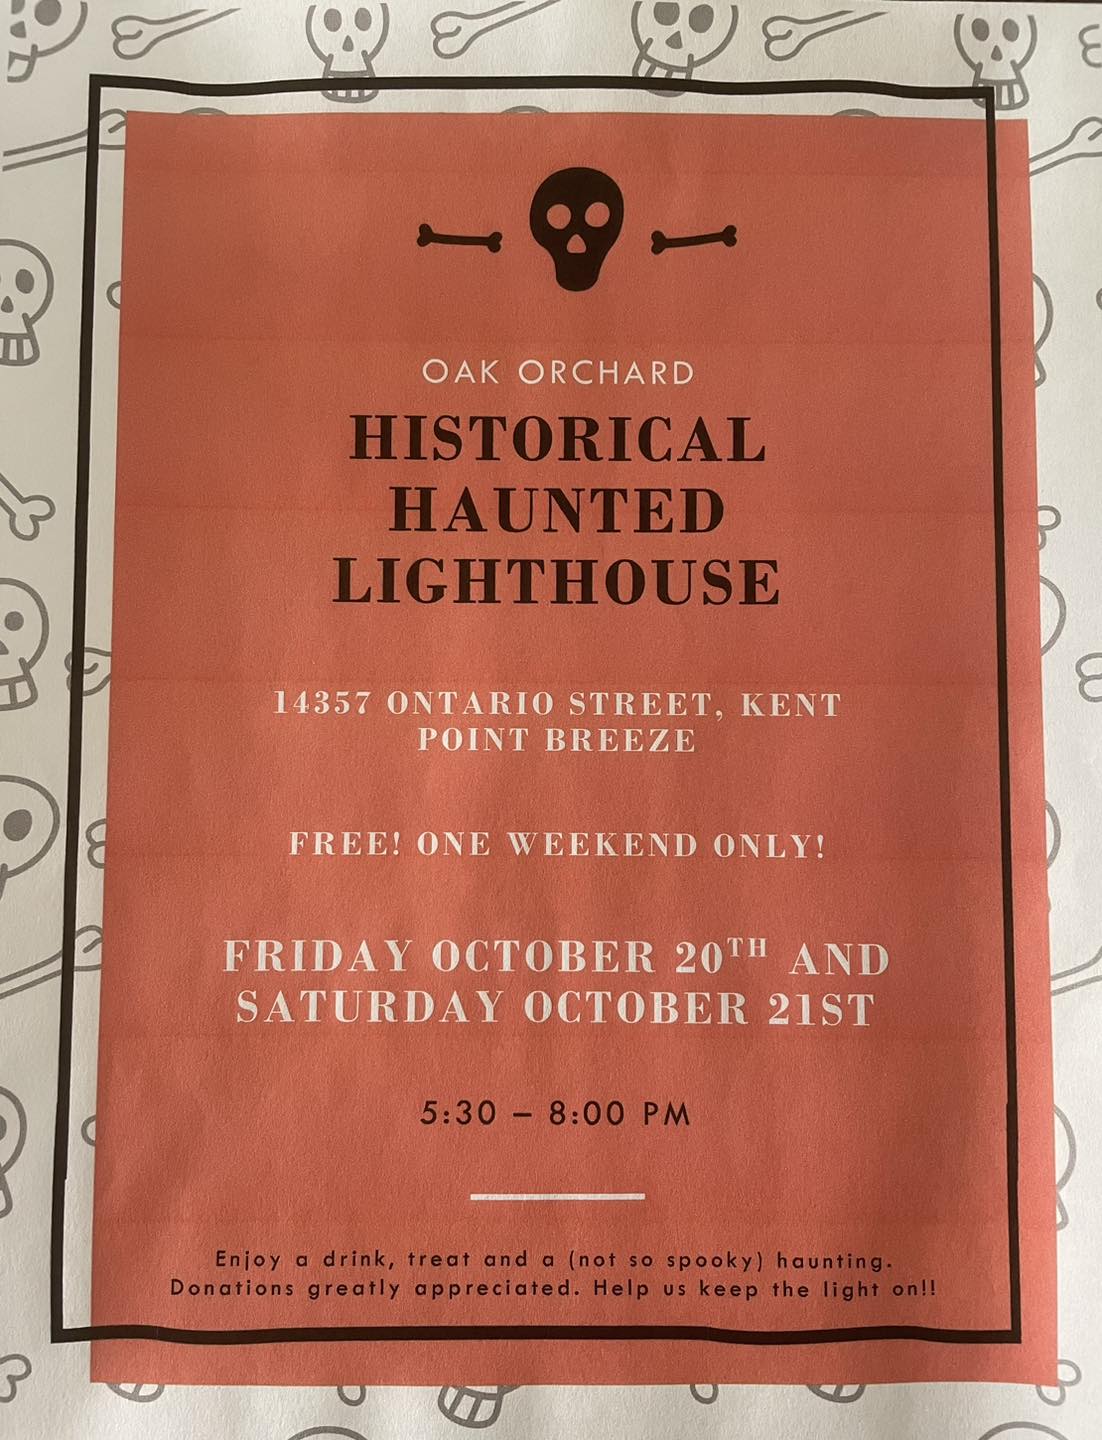 The Oak Orchard Lighthouse Museum turns into an Historical Haunted Lighthouse on the evenings of Friday and Saturday, October 20-21, 2023. Enjoy a drink, treat and a not-too-spooky, but haunting performance.